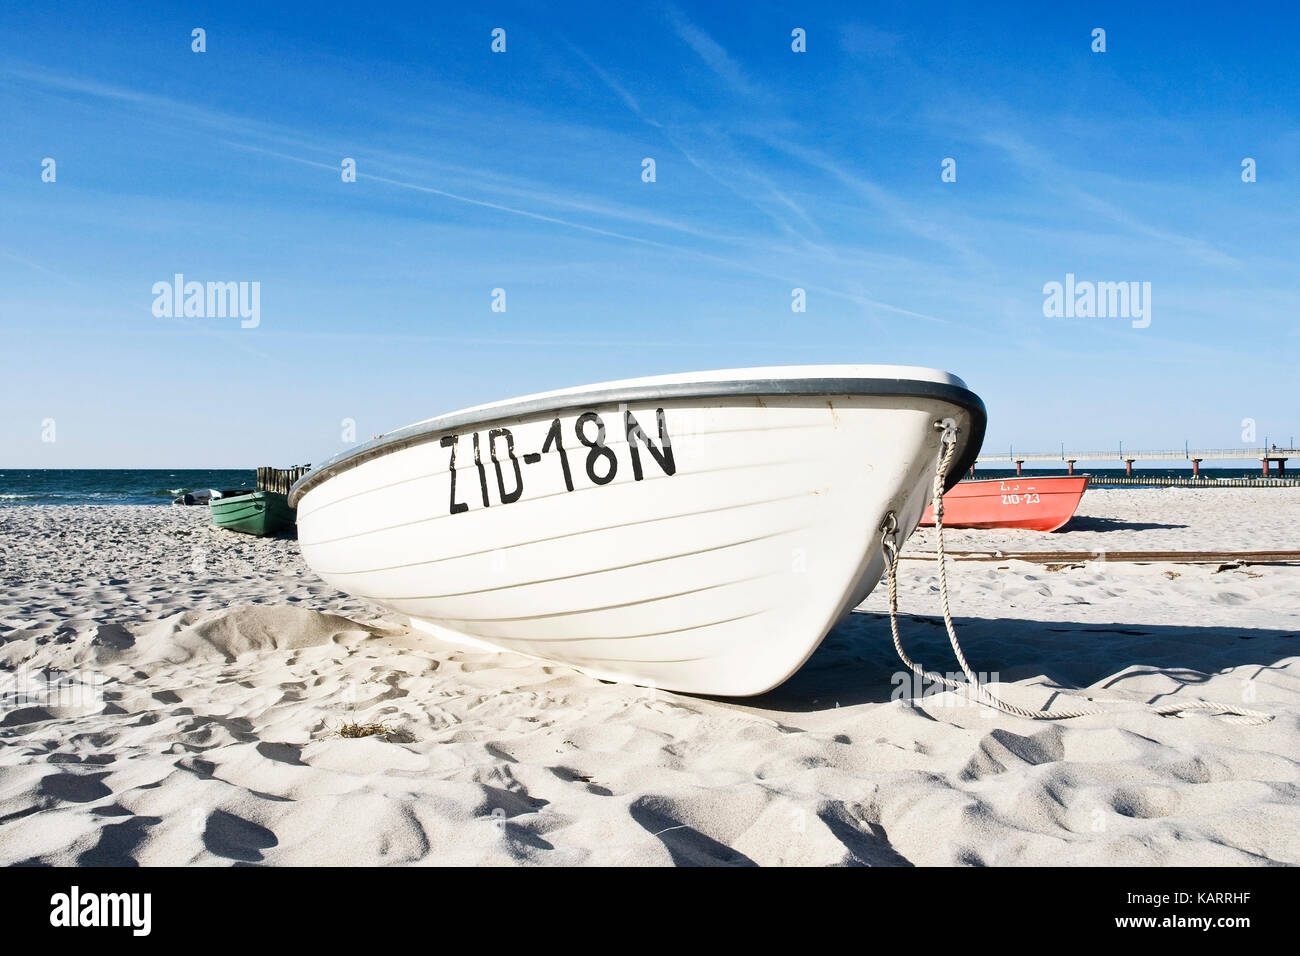 Zingst, boats on the beach, Boote am Strand Stock Photo